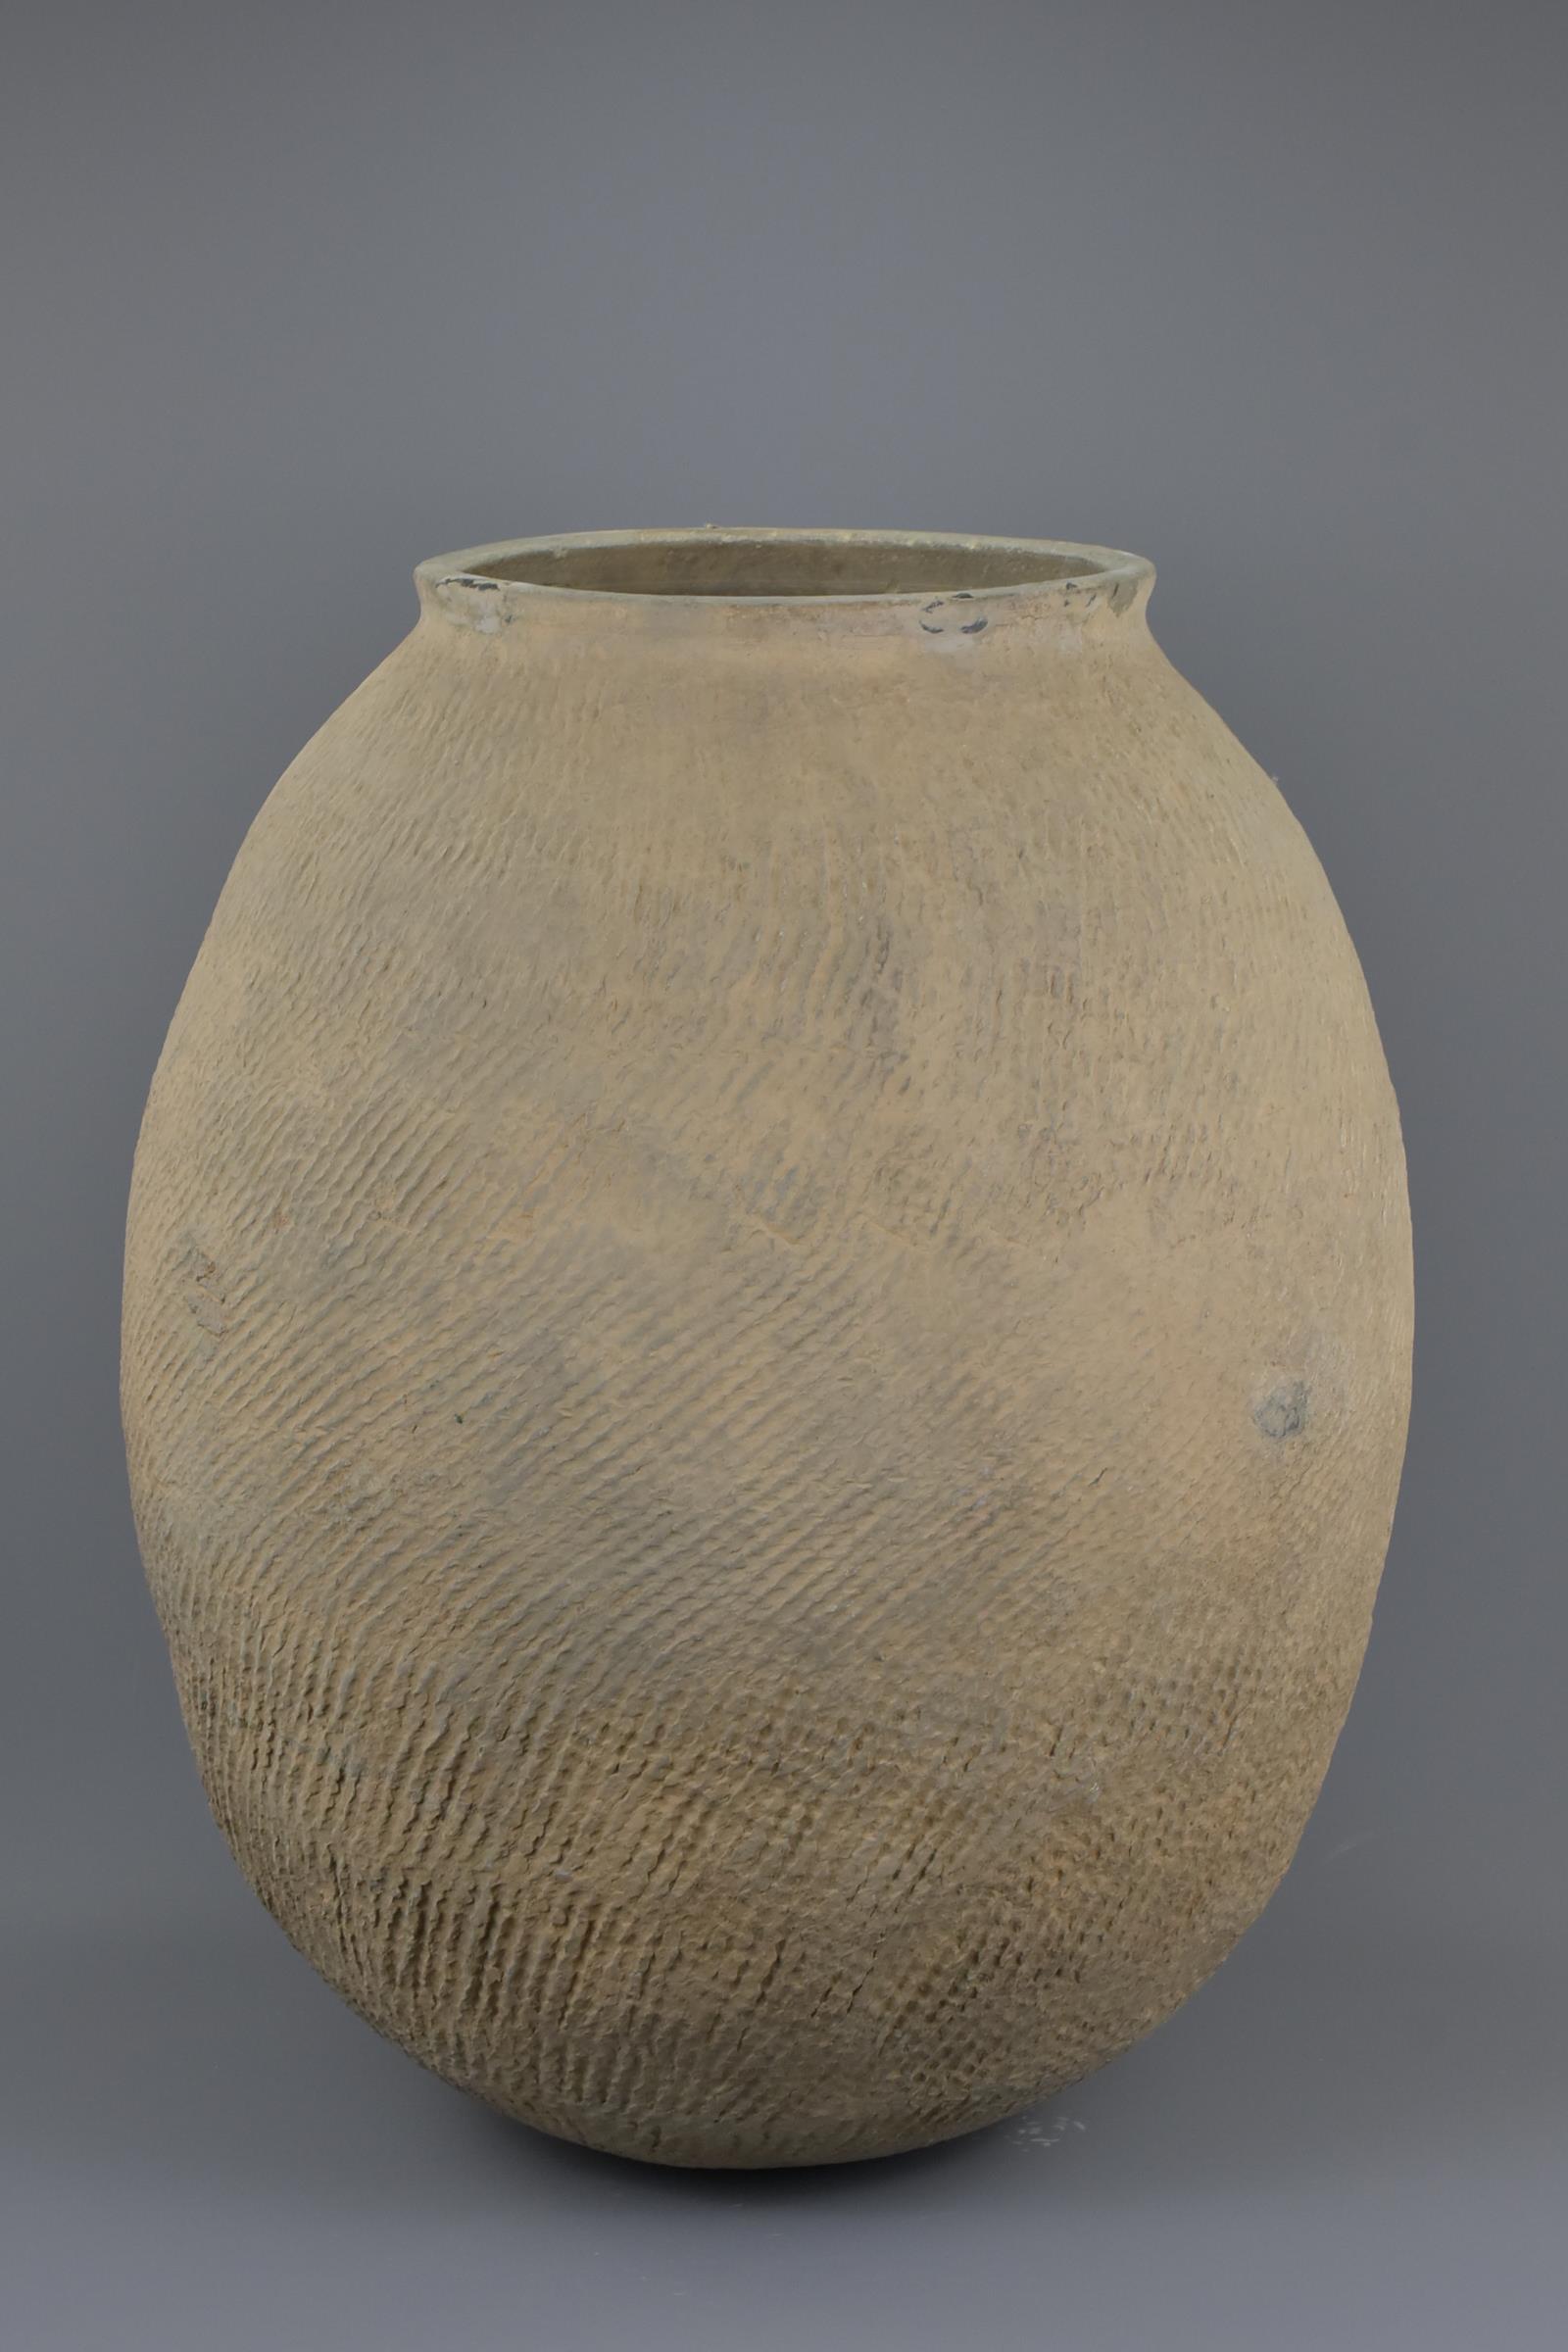 An Exceptionally LARGE Chinese Neolithic / Bronze Age Impressed Pottery Jar with Oxford TL Test - Image 7 of 7